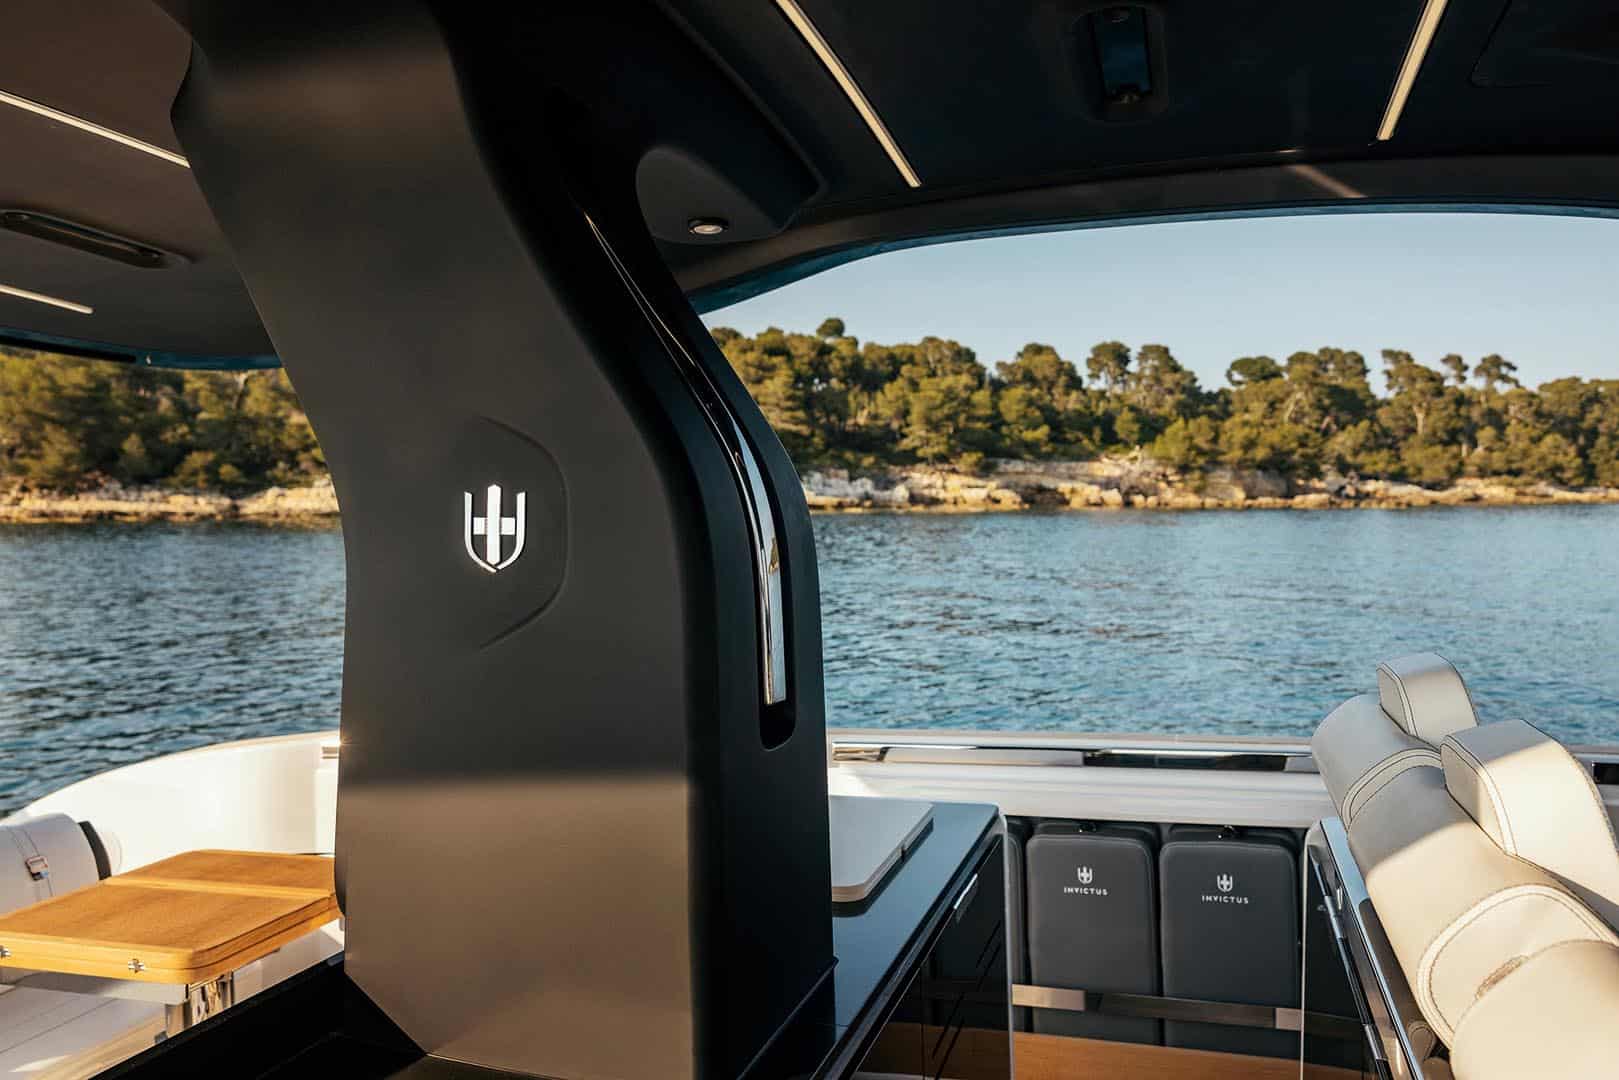 The carbon-fibre roof pillar connects directly to the hull